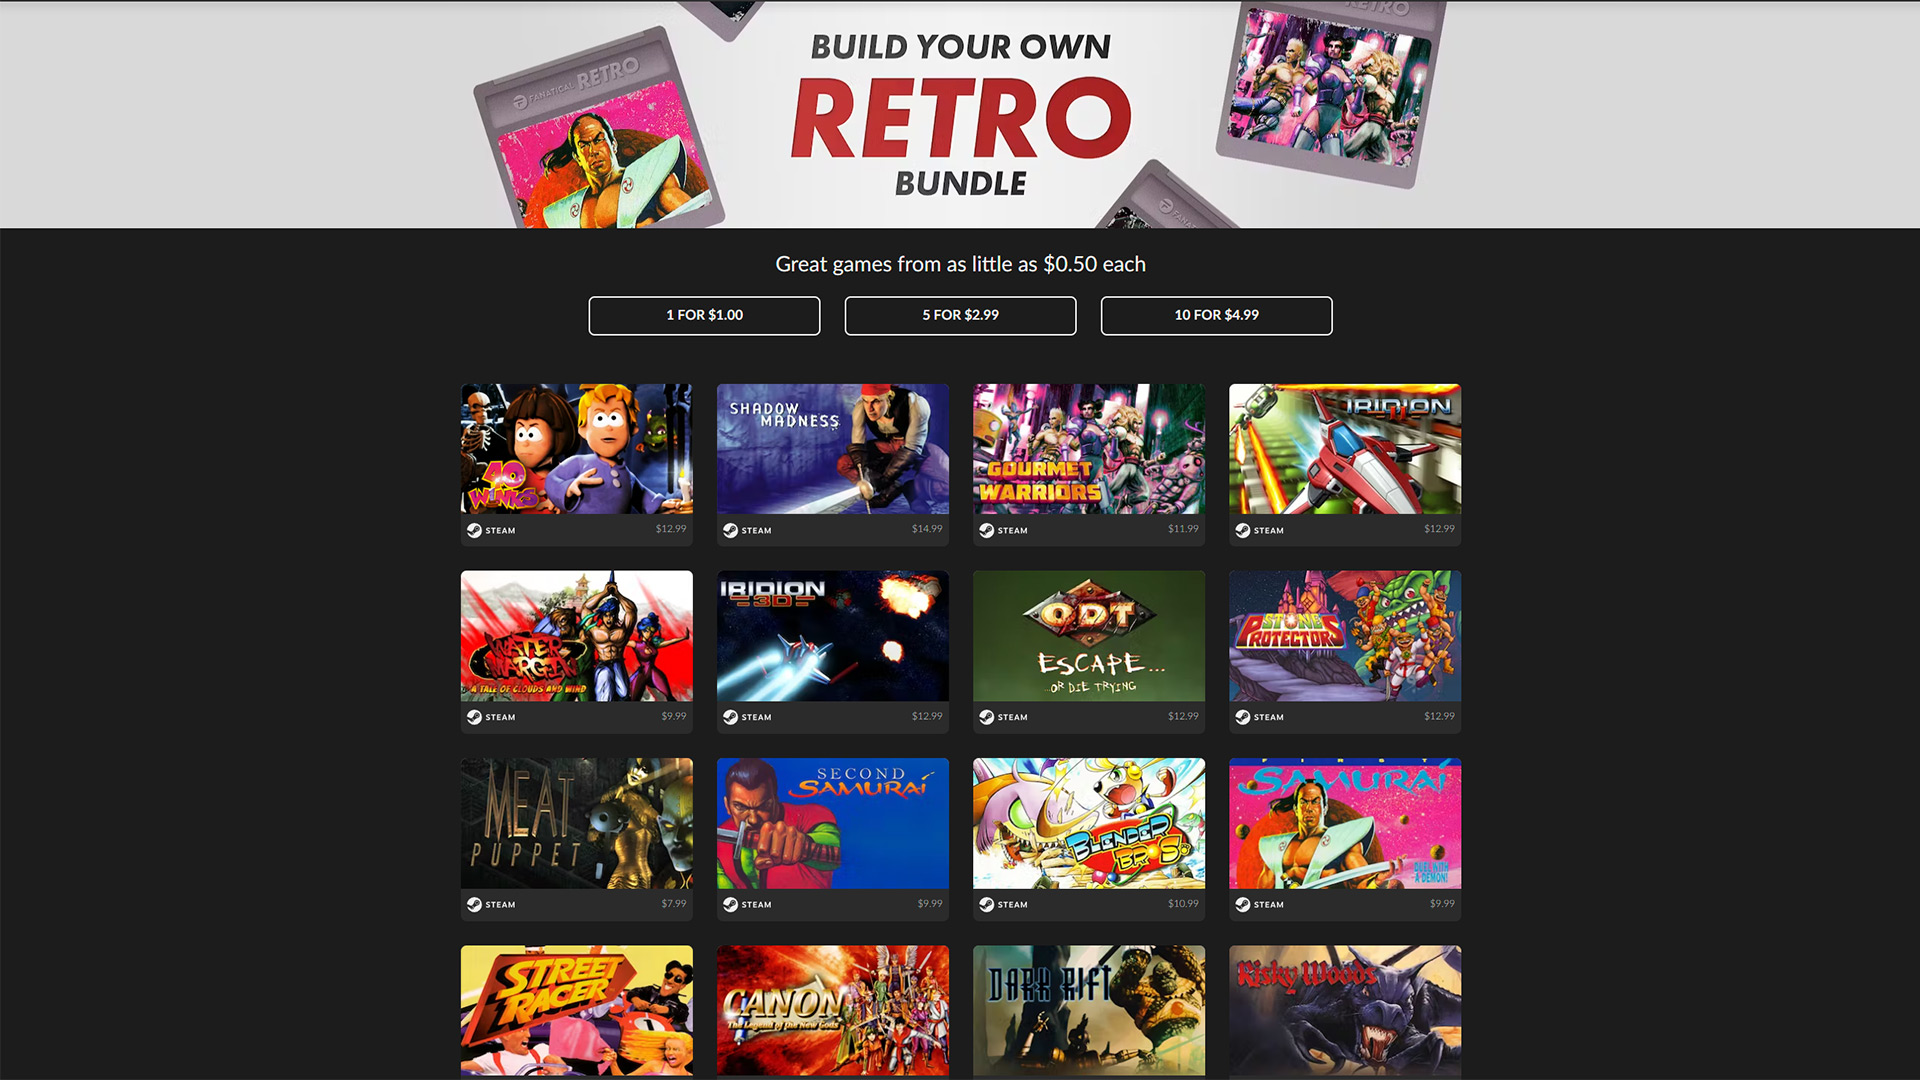 You can currently get 10 retro games for just $4.99 at Fanatical